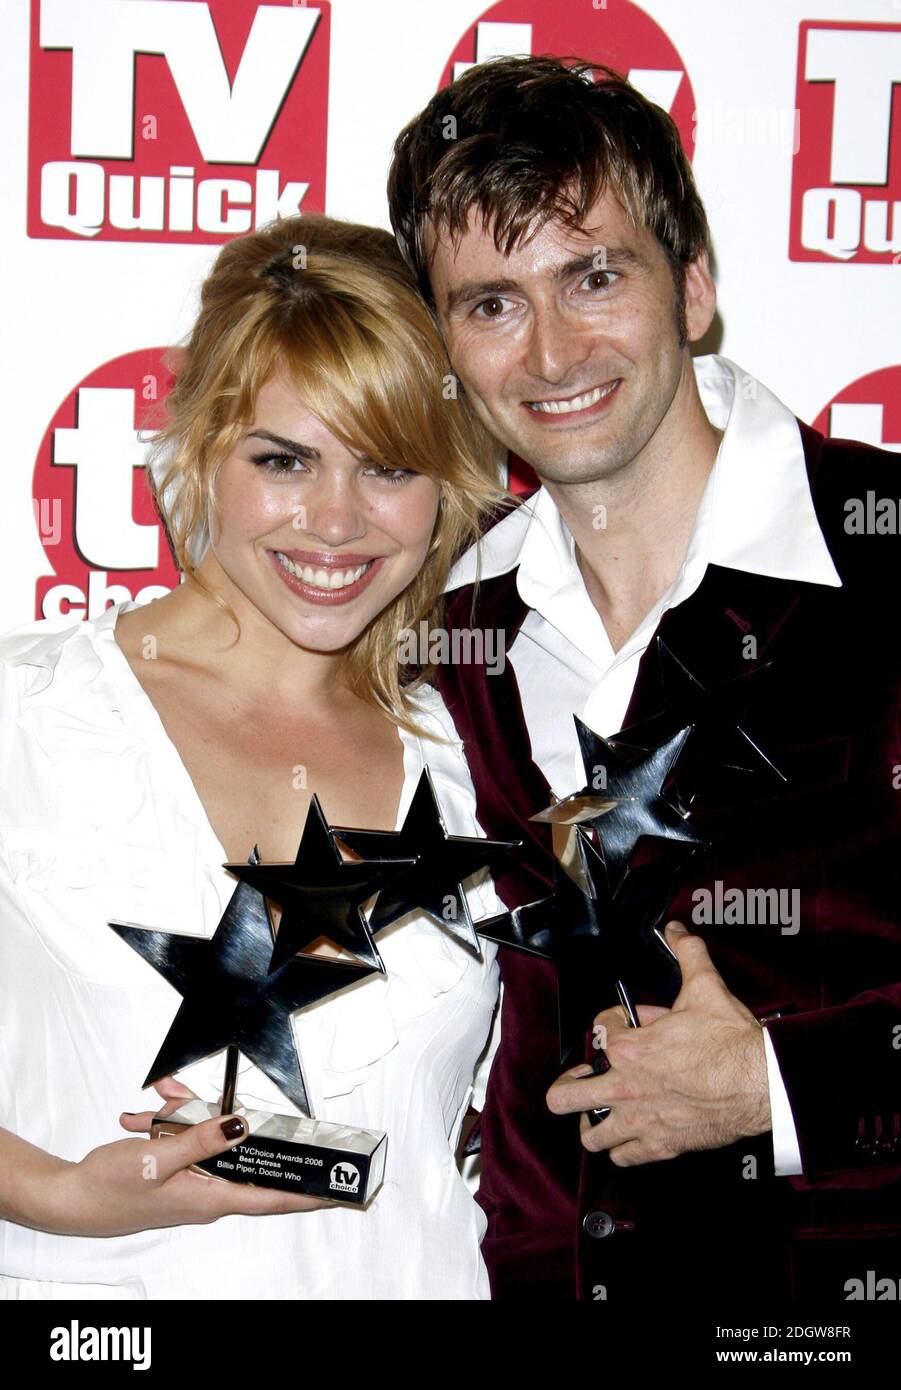 Billie Piper And David Tennant High Resolution Stock Photography And Images Alamy